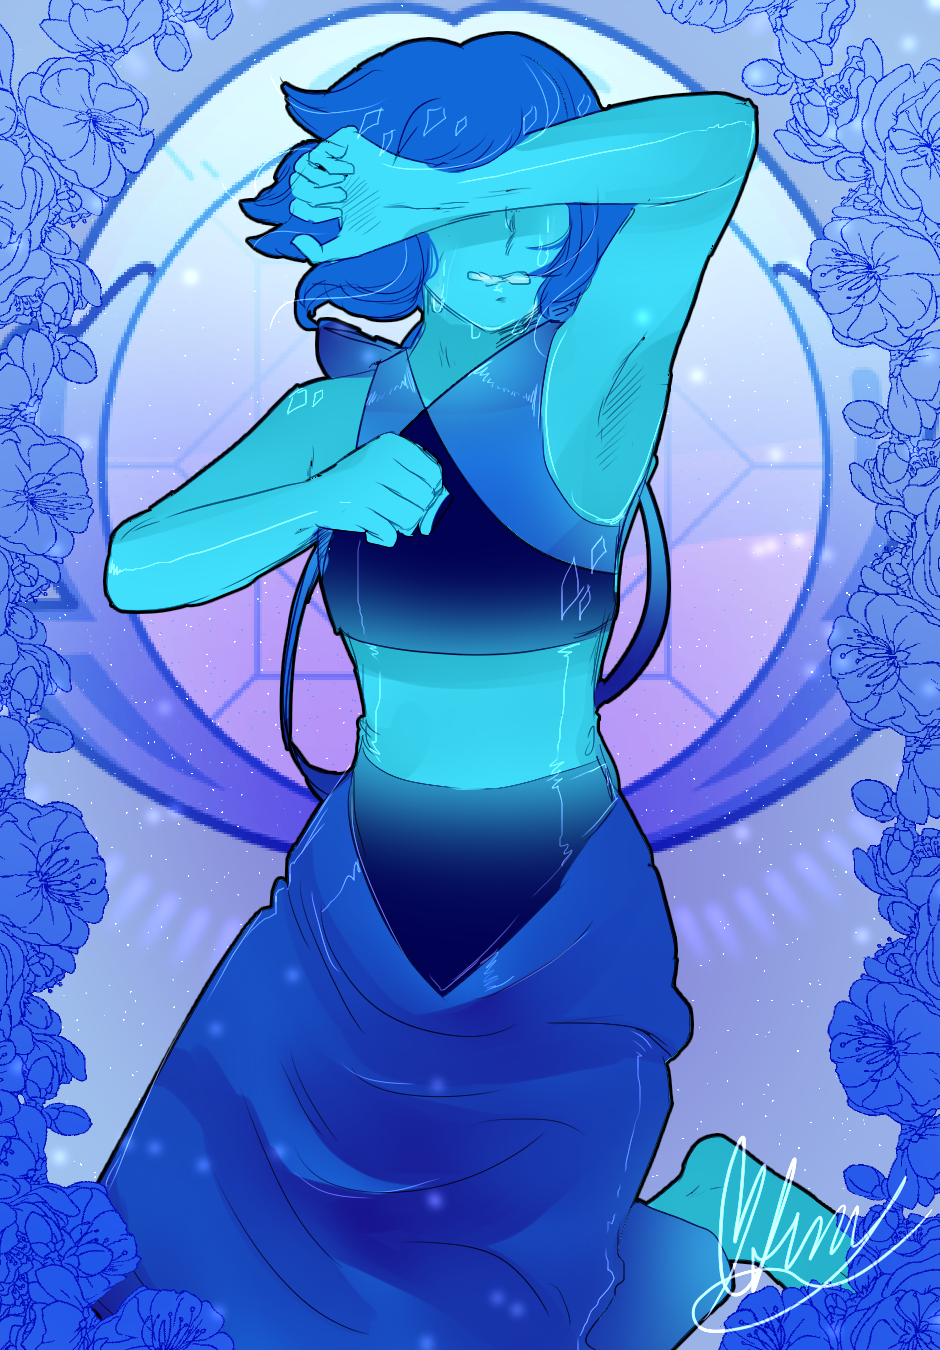 That was one hell of an artblock;; Lapis brought me out of it;; just noticed i never really drew her before…If i find some more time aside school i’ll go for a cute peridot as well!